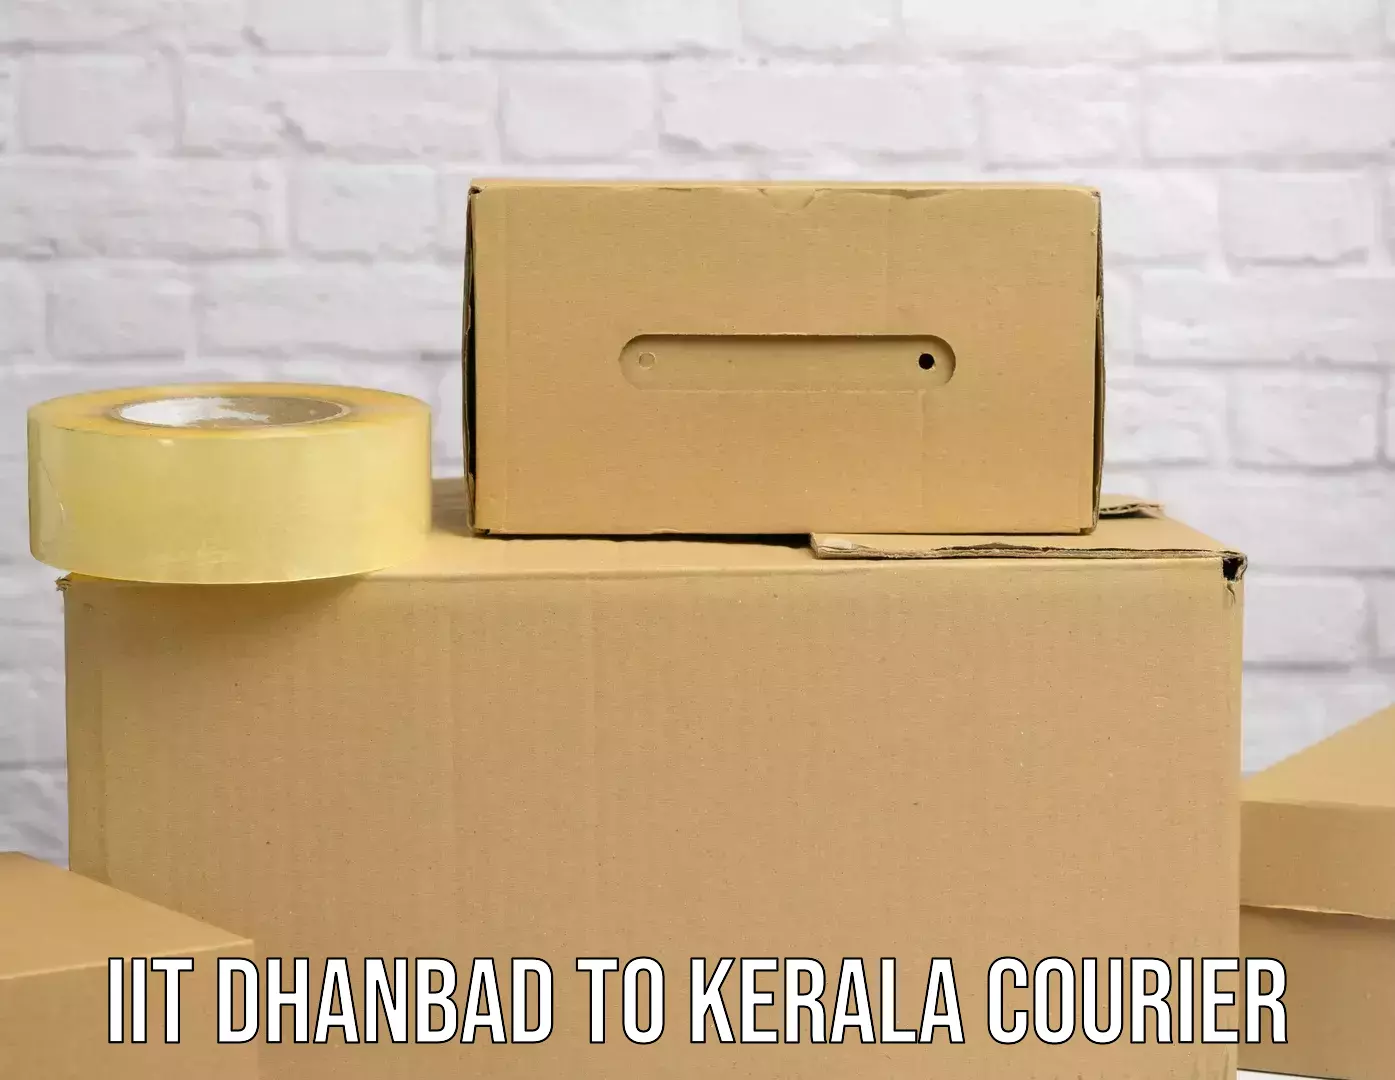 Business logistics support IIT Dhanbad to Kerala